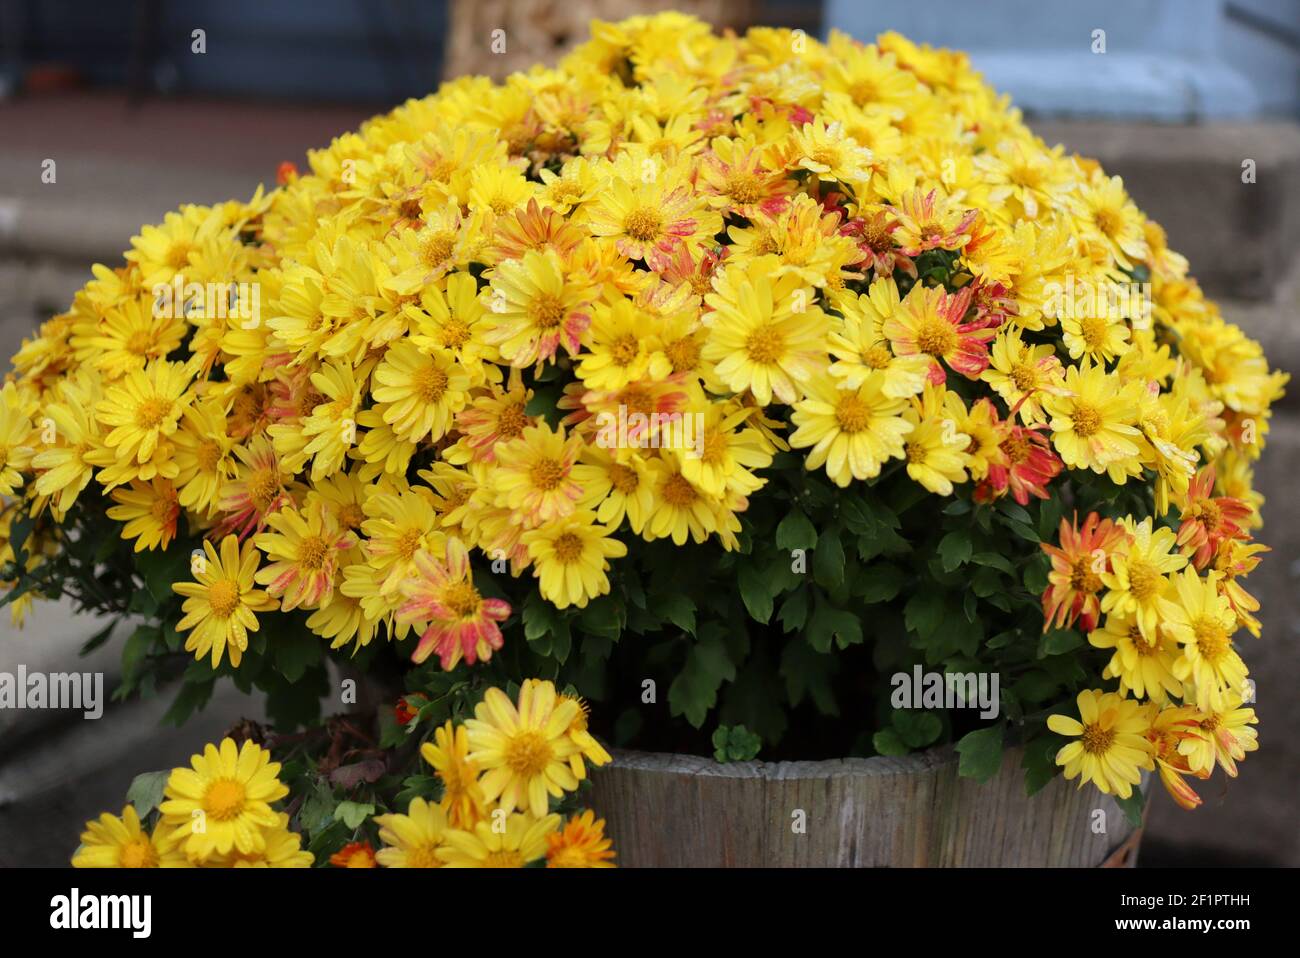 Yellow is thre dominant and prominent bright color in these imags. Stock Photo